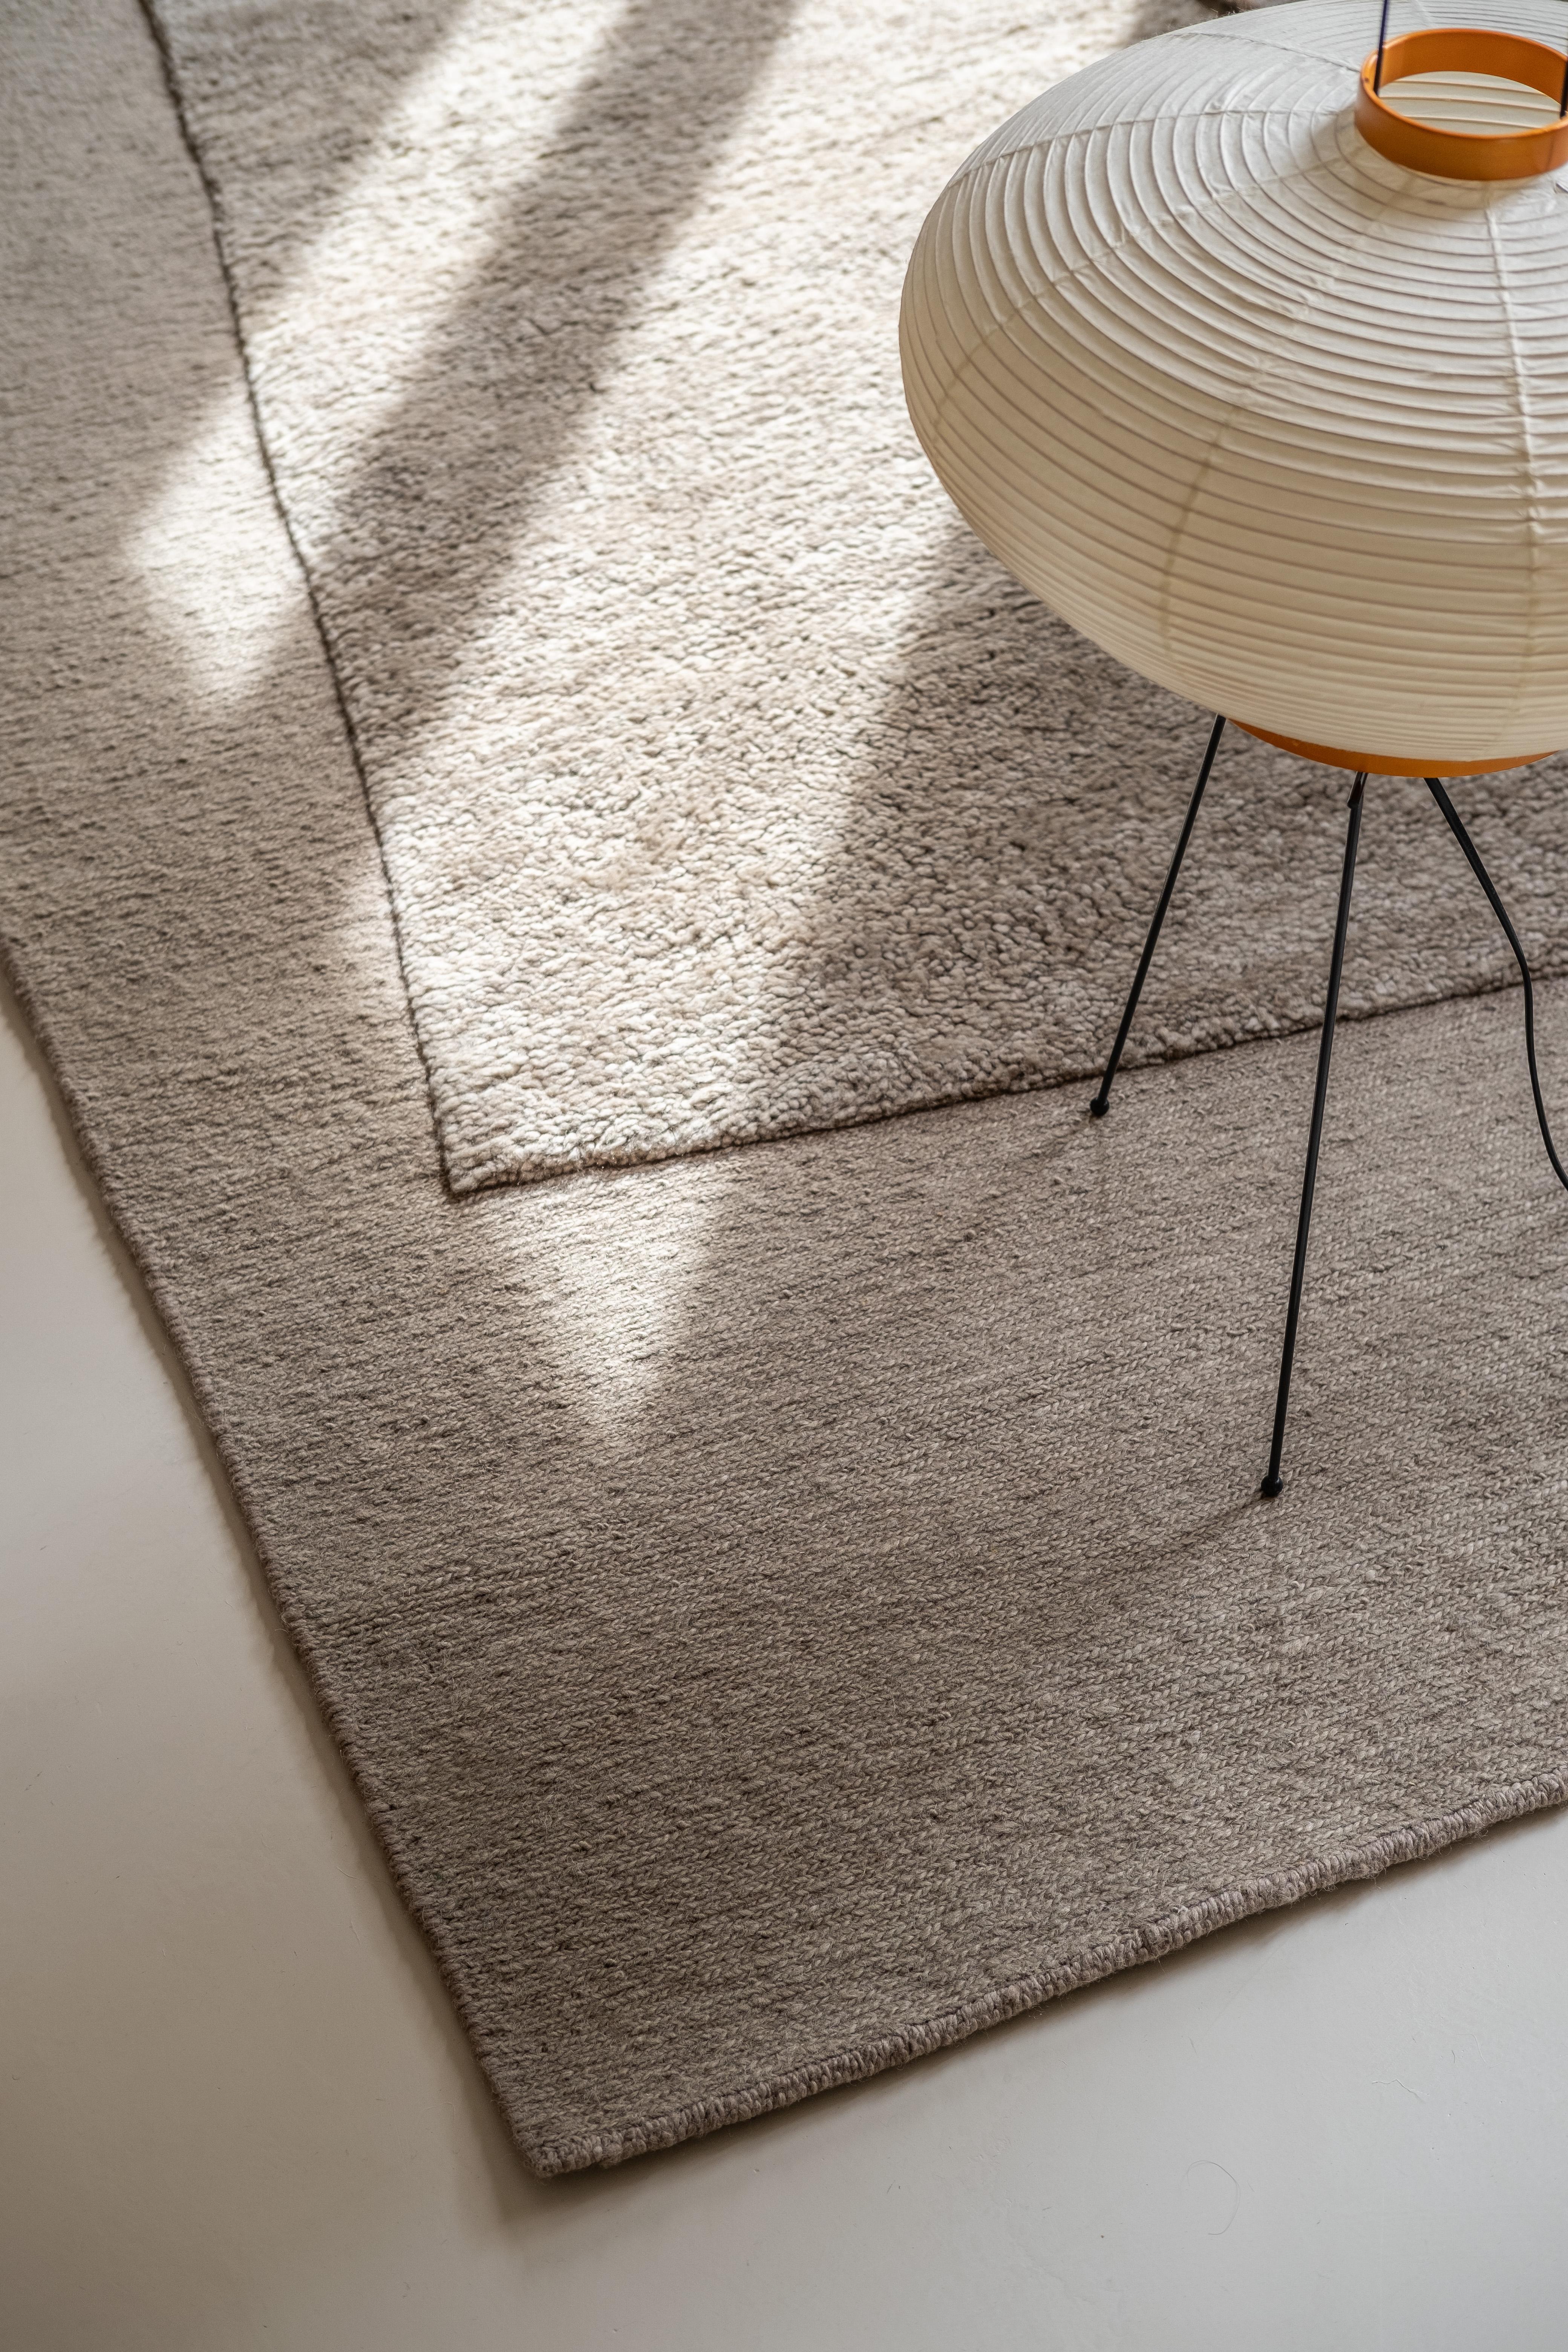 Oblique, designed by Begüm Cana Özgür, captures the most contemporary conceptualization of the tradition of overlaying rugs. This proposal is achieved through the juxtaposition of oblique figures resulting in a geometric finesse, thanks to the